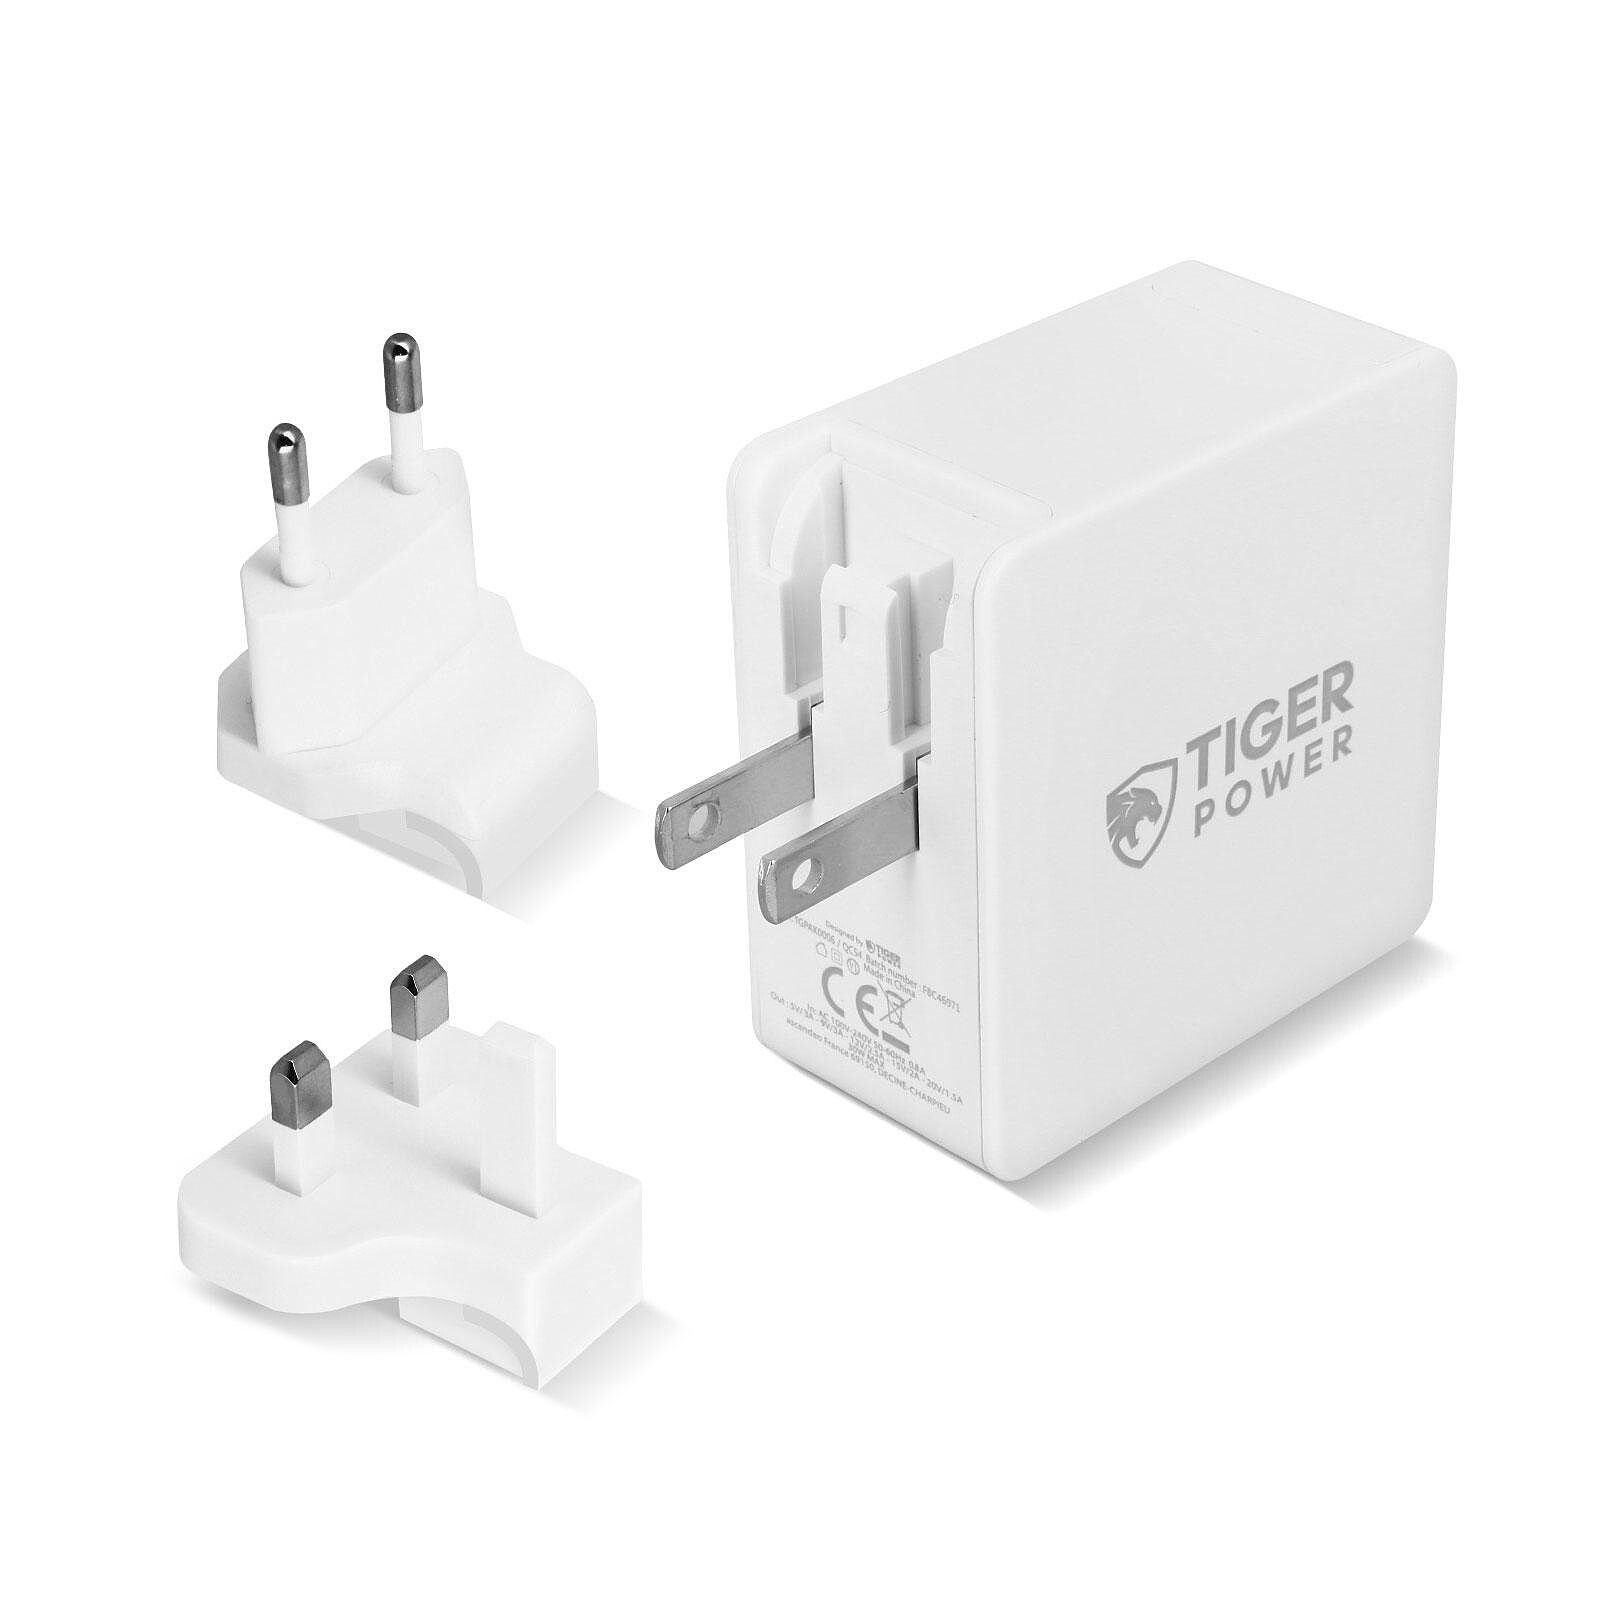 CHARGEUR SECTEUR USB TYPE-C 38W POWER DELIVERY - BLANC